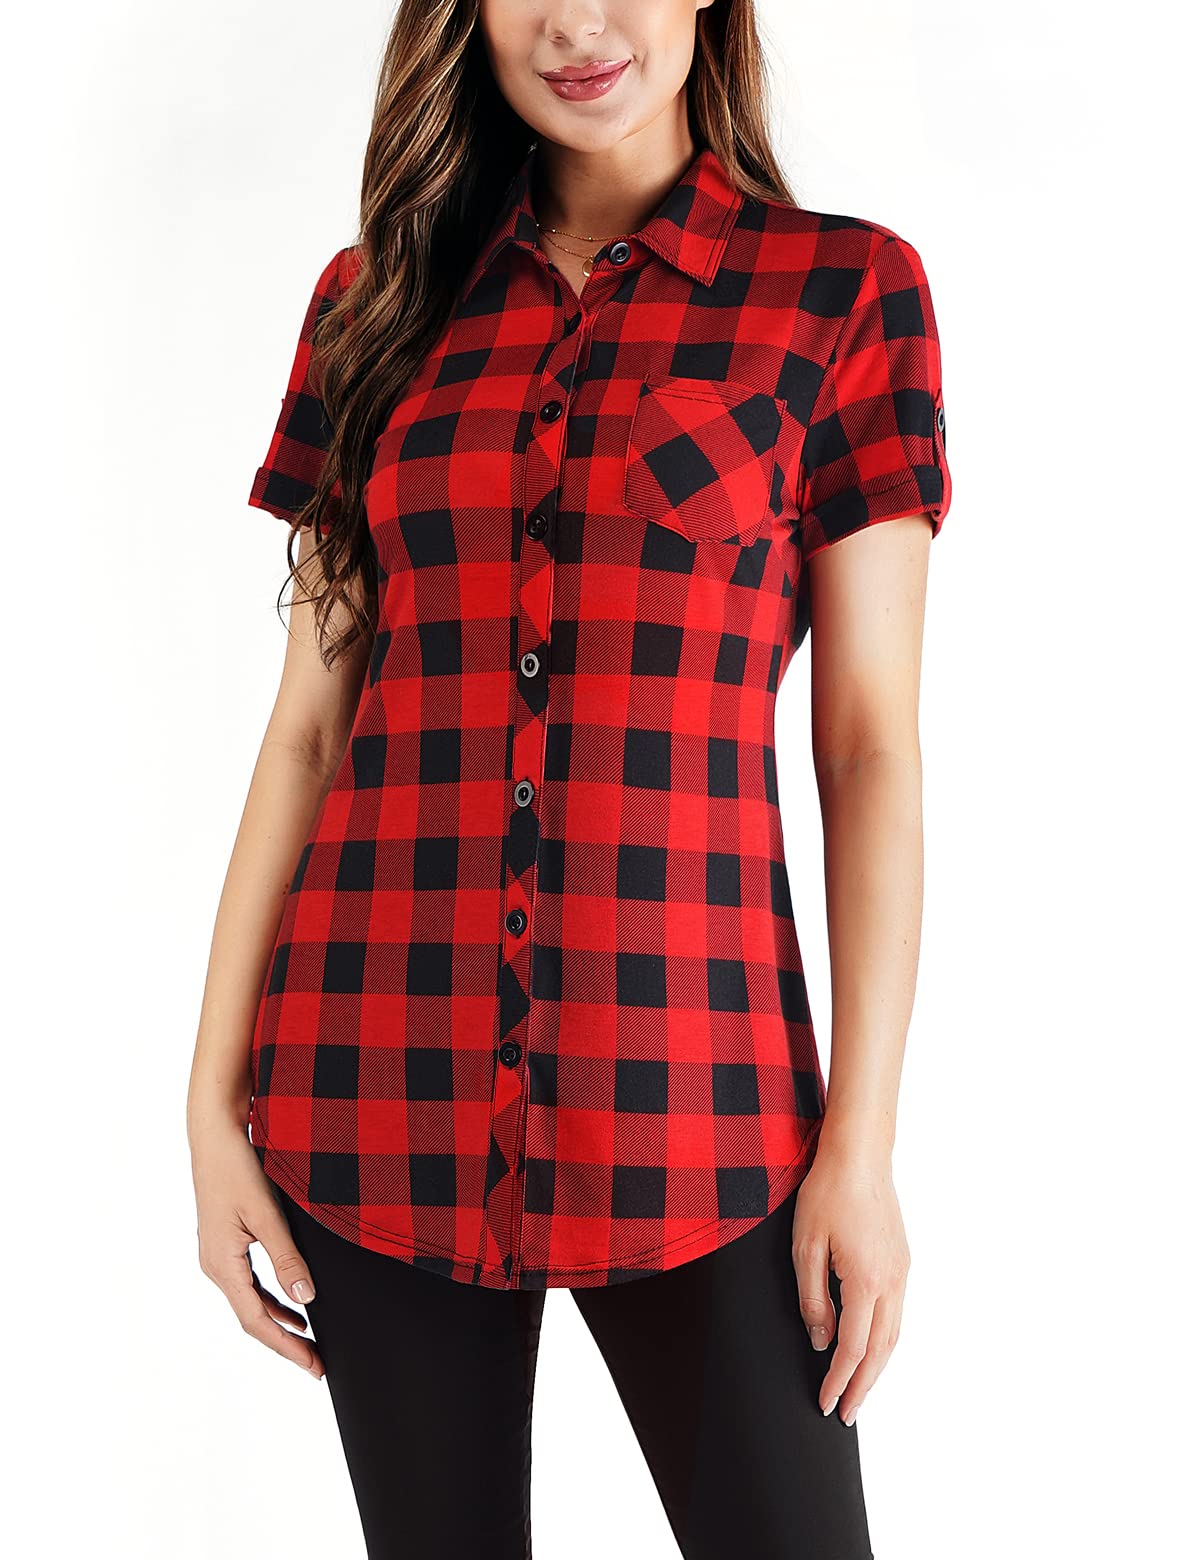 DJT Roll Up Long Sleeve Red Plaid Women’s Sleeve Collared Button Down Plaid Shirt